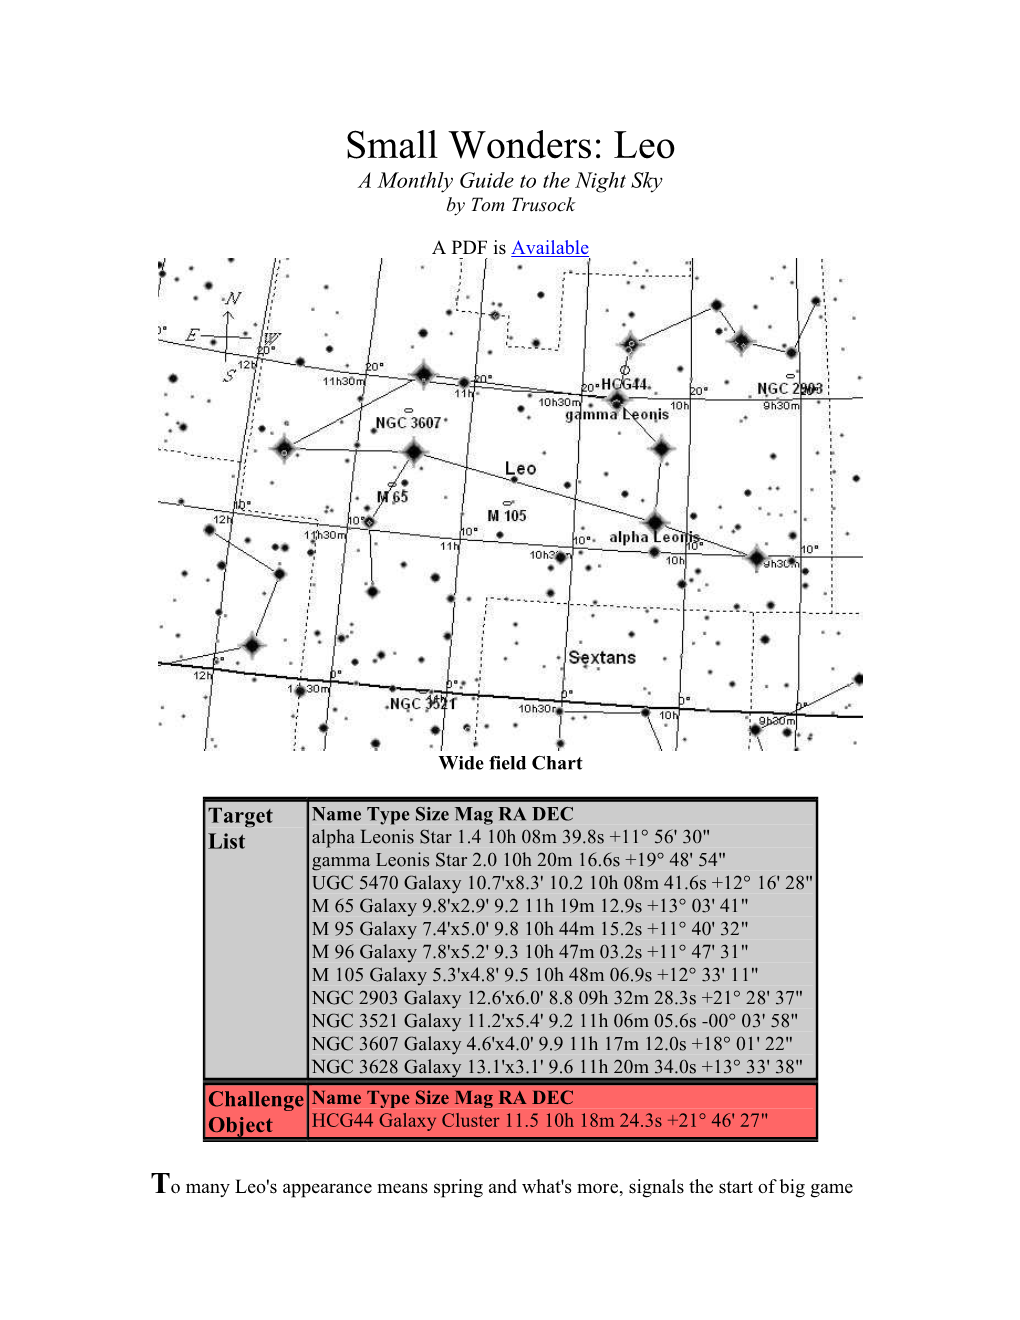 Leo a Monthly Guide to the Night Sky by Tom Trusock